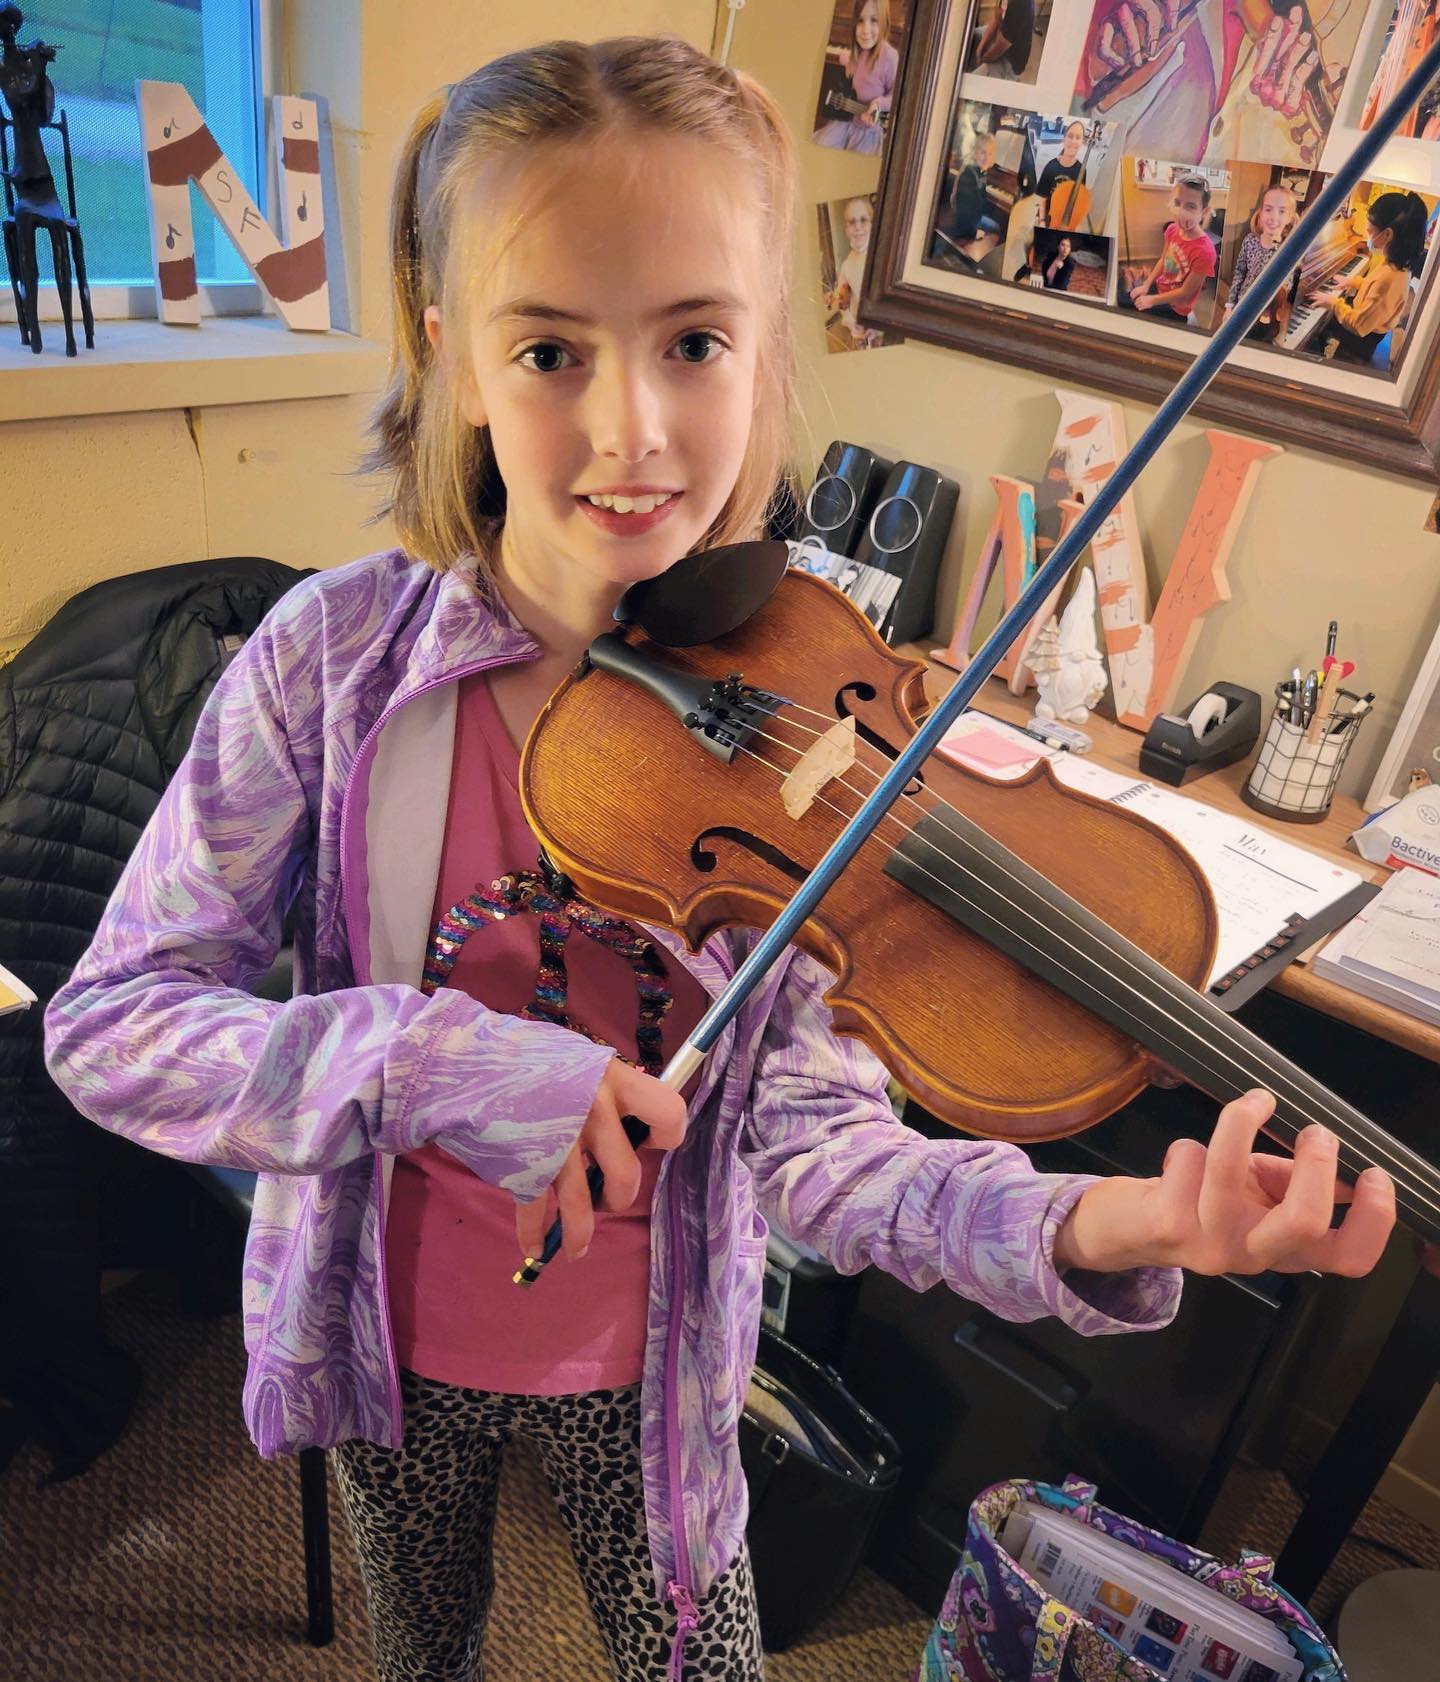 #UMCRedWing violin student Makayla loves playing music and practicing with her teacher Susan! #musiclessons